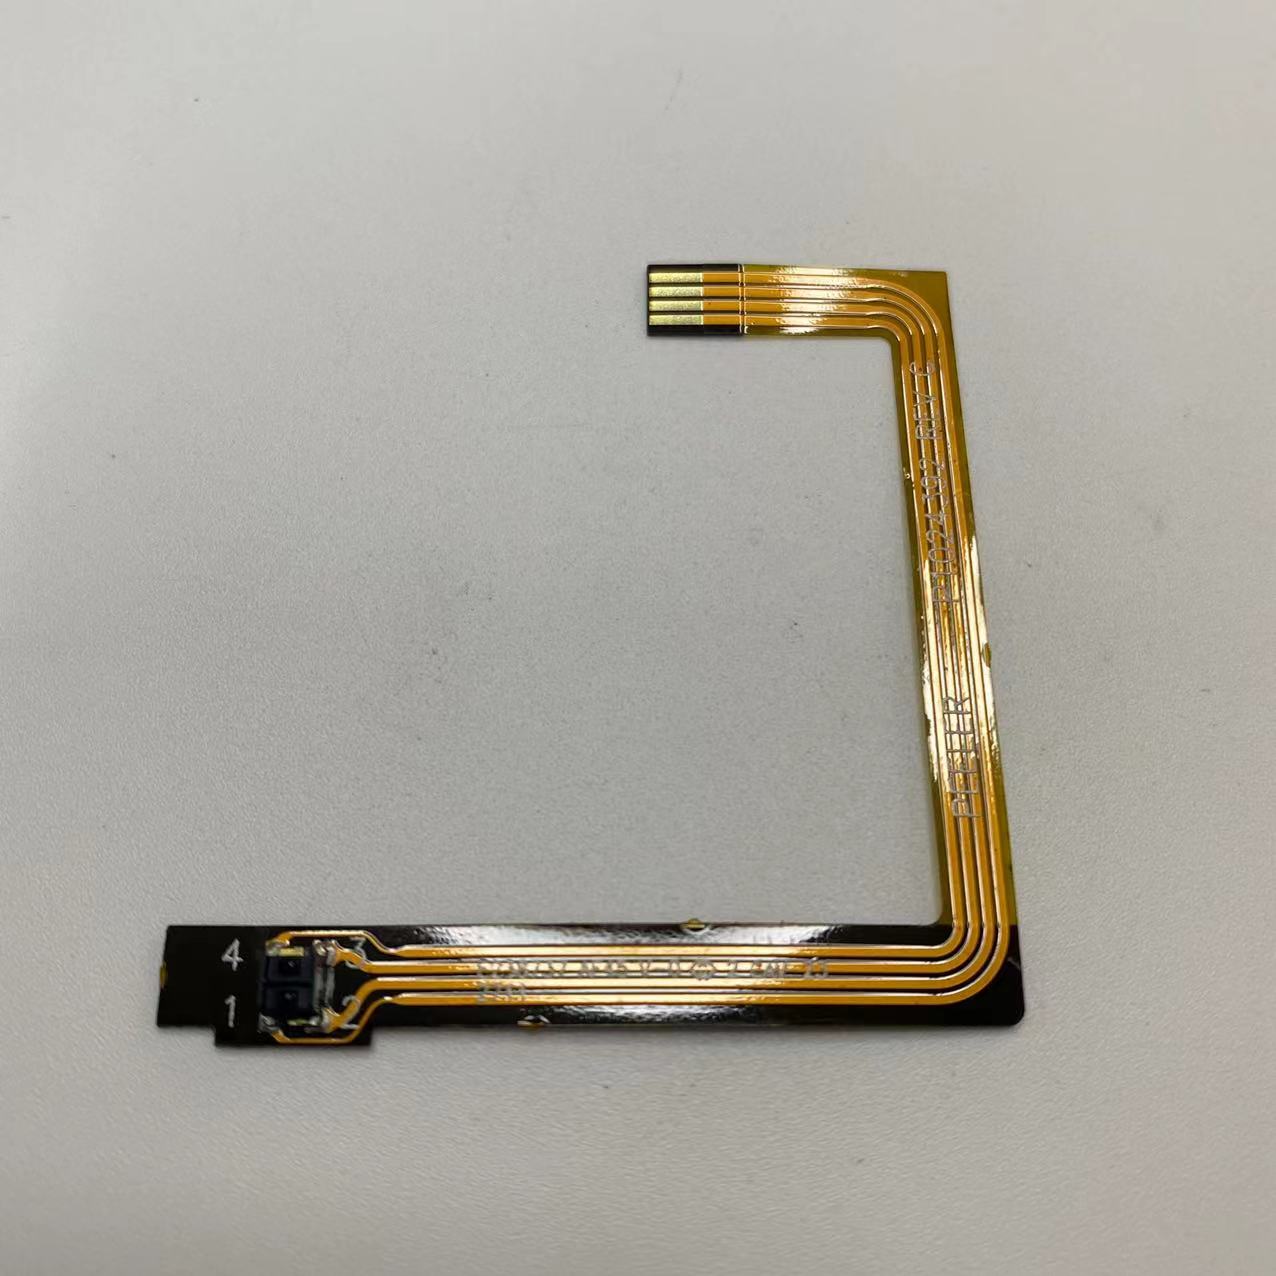 Peeler Bail With Label Present Sensor Flex Cable For Replacement Zebra Qln320 Mobile Printer 1137